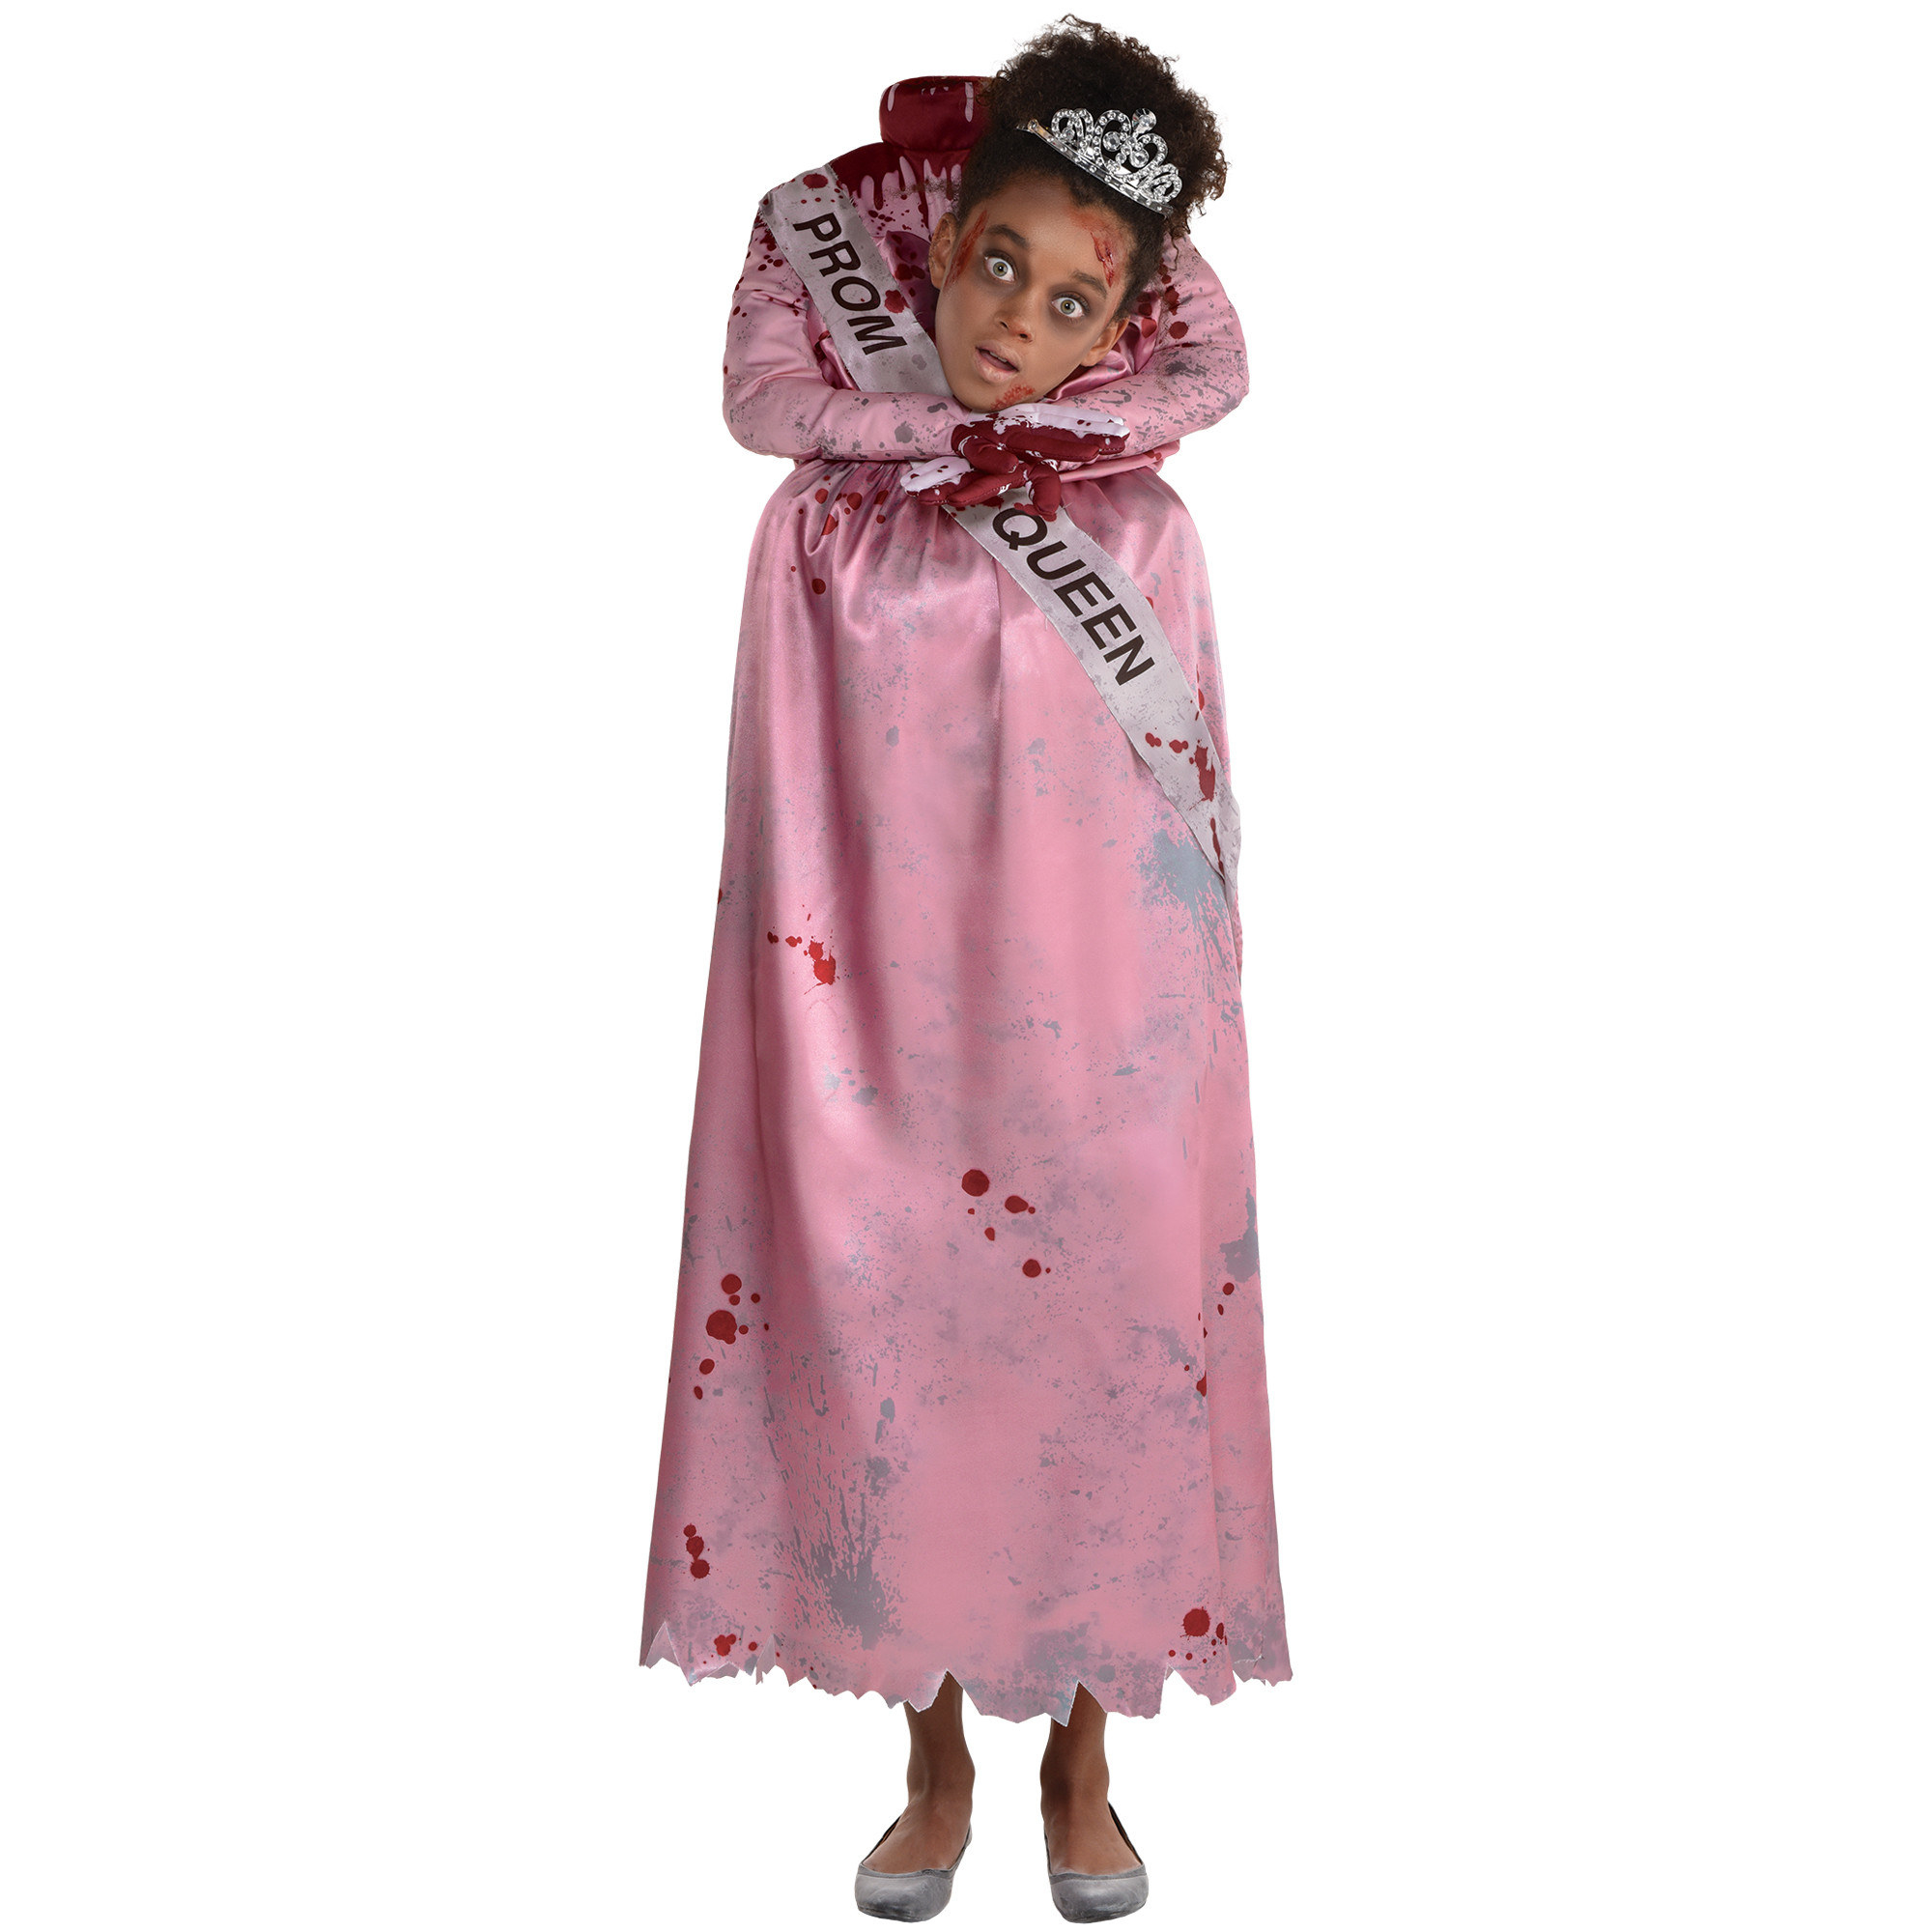 girl in haunted prom queen costume with missing head